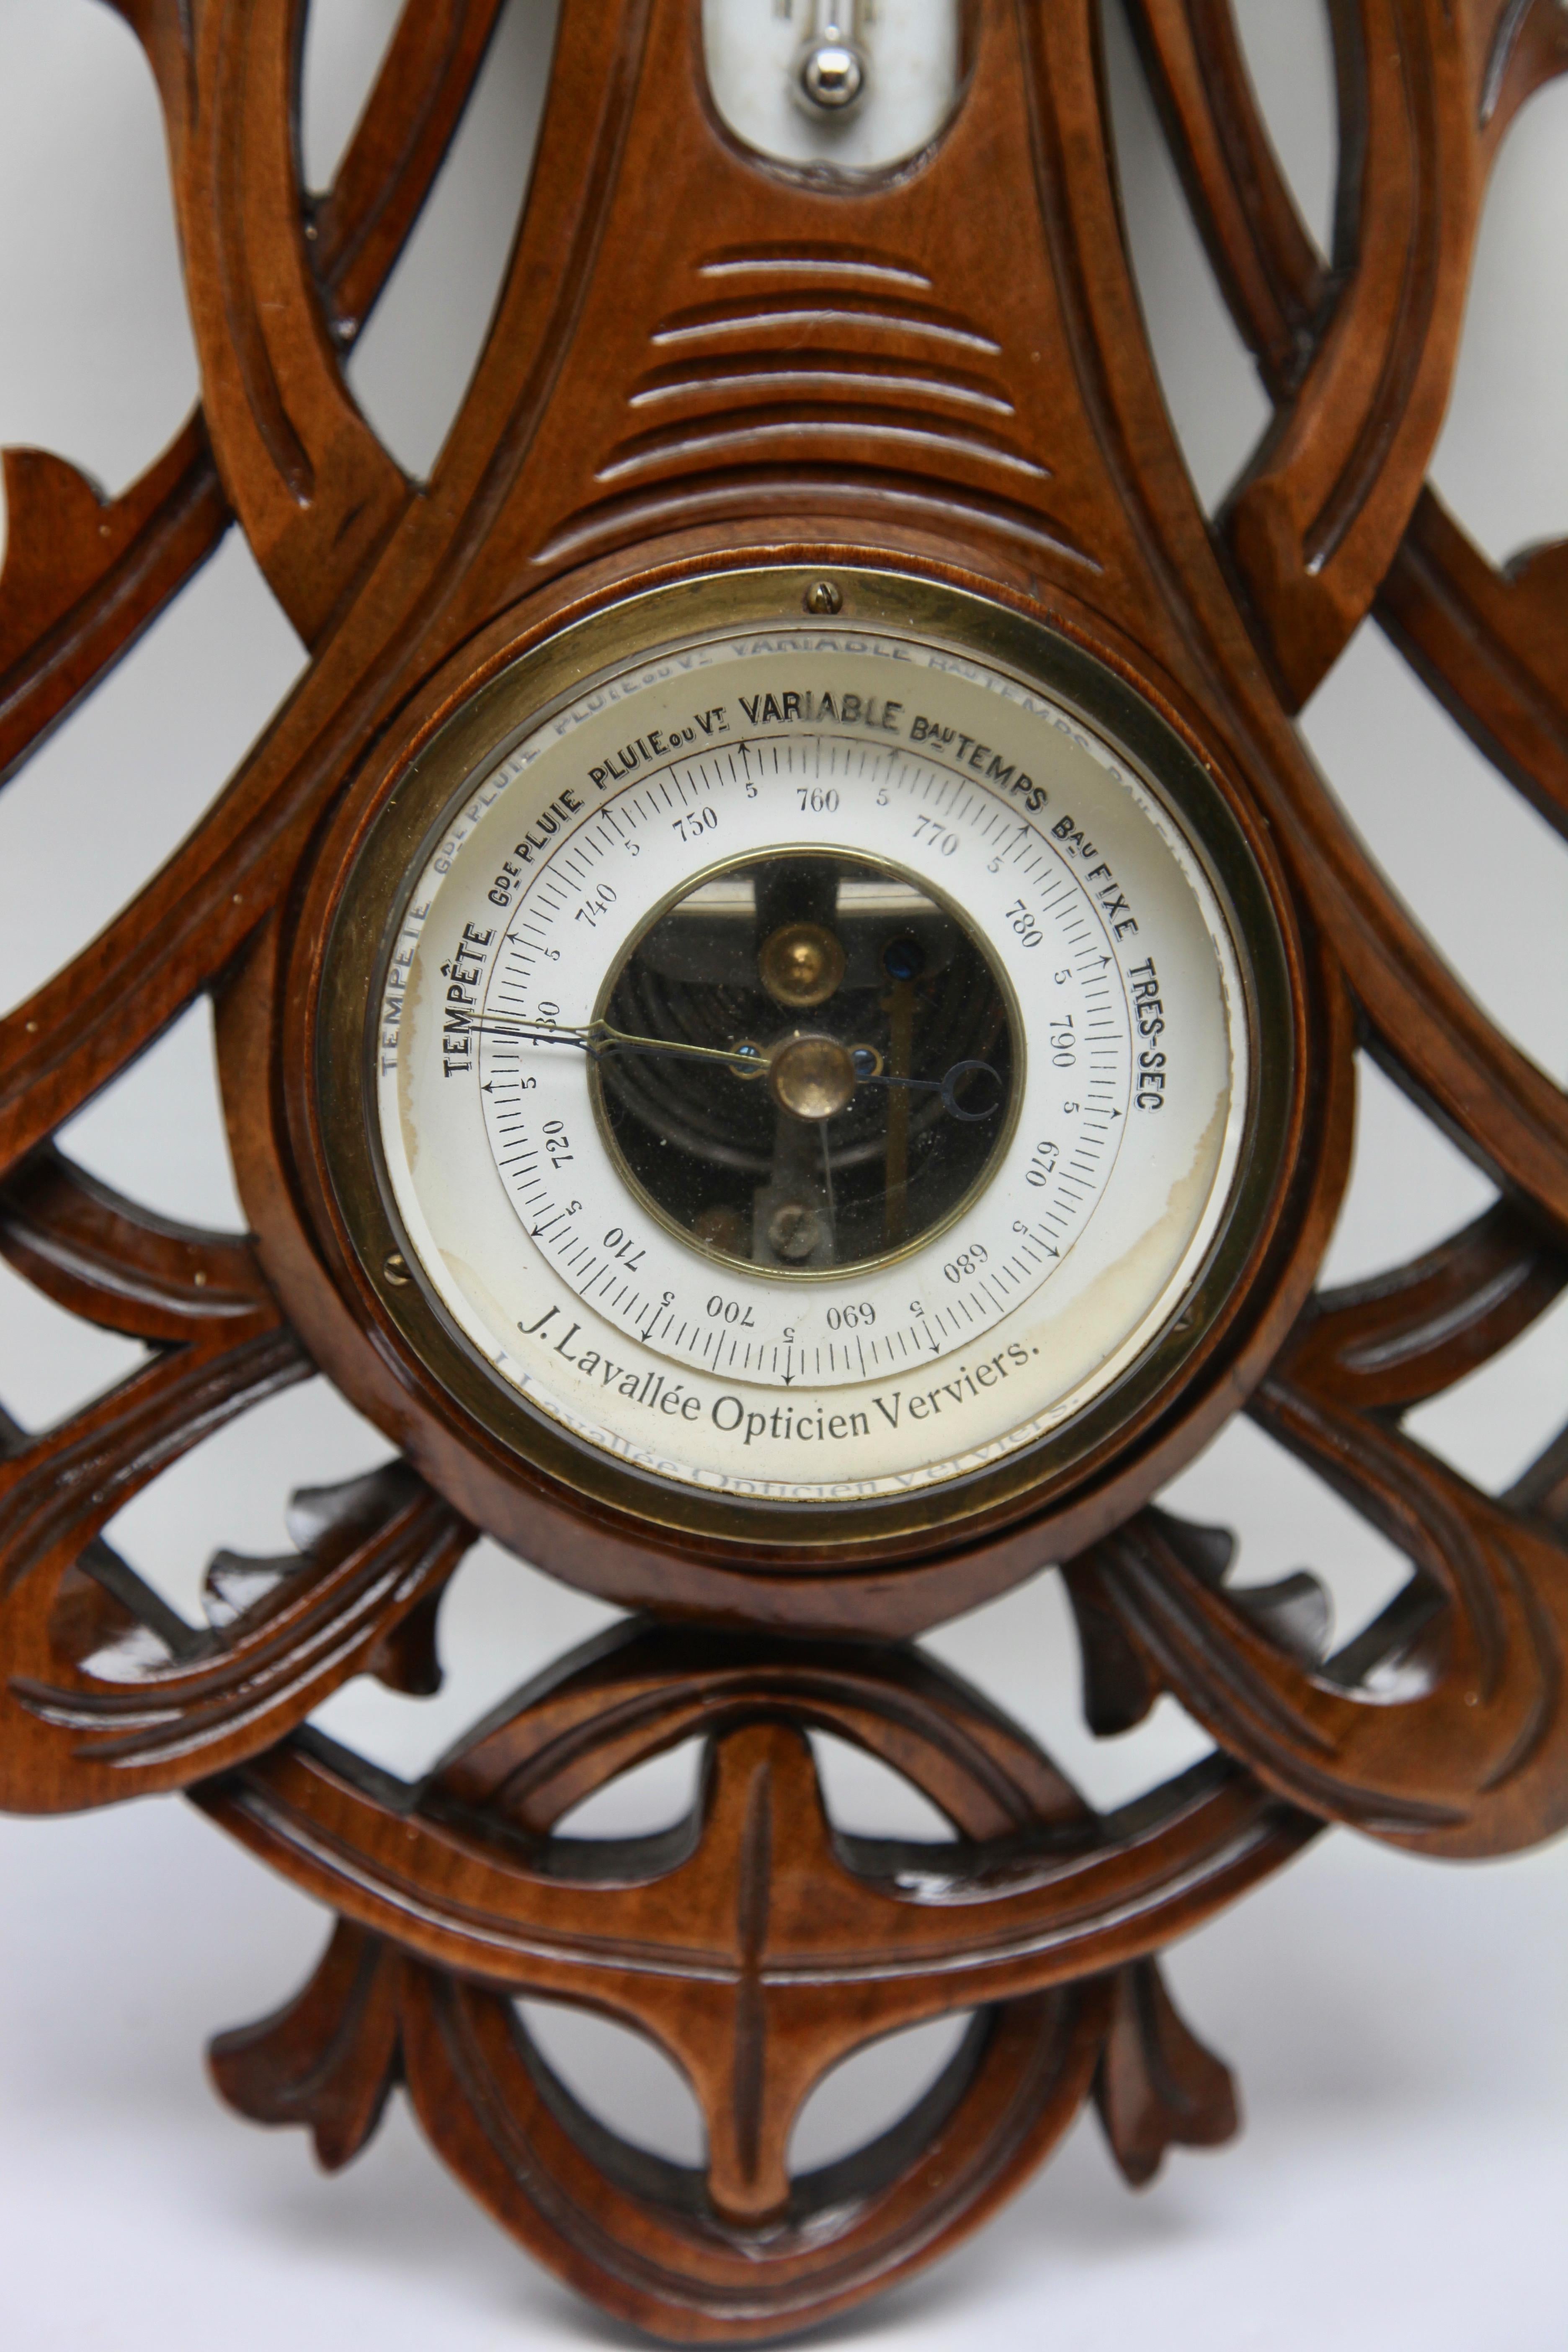 Carved oakwood antique French barometer with thermometer by the firme De Lambert, 1910s
Made in Belgium by A. de Lambert. High quality mechanism with jeweled movement barometer and thermometer (in centigrade)
Unusual antique carved oak barometer